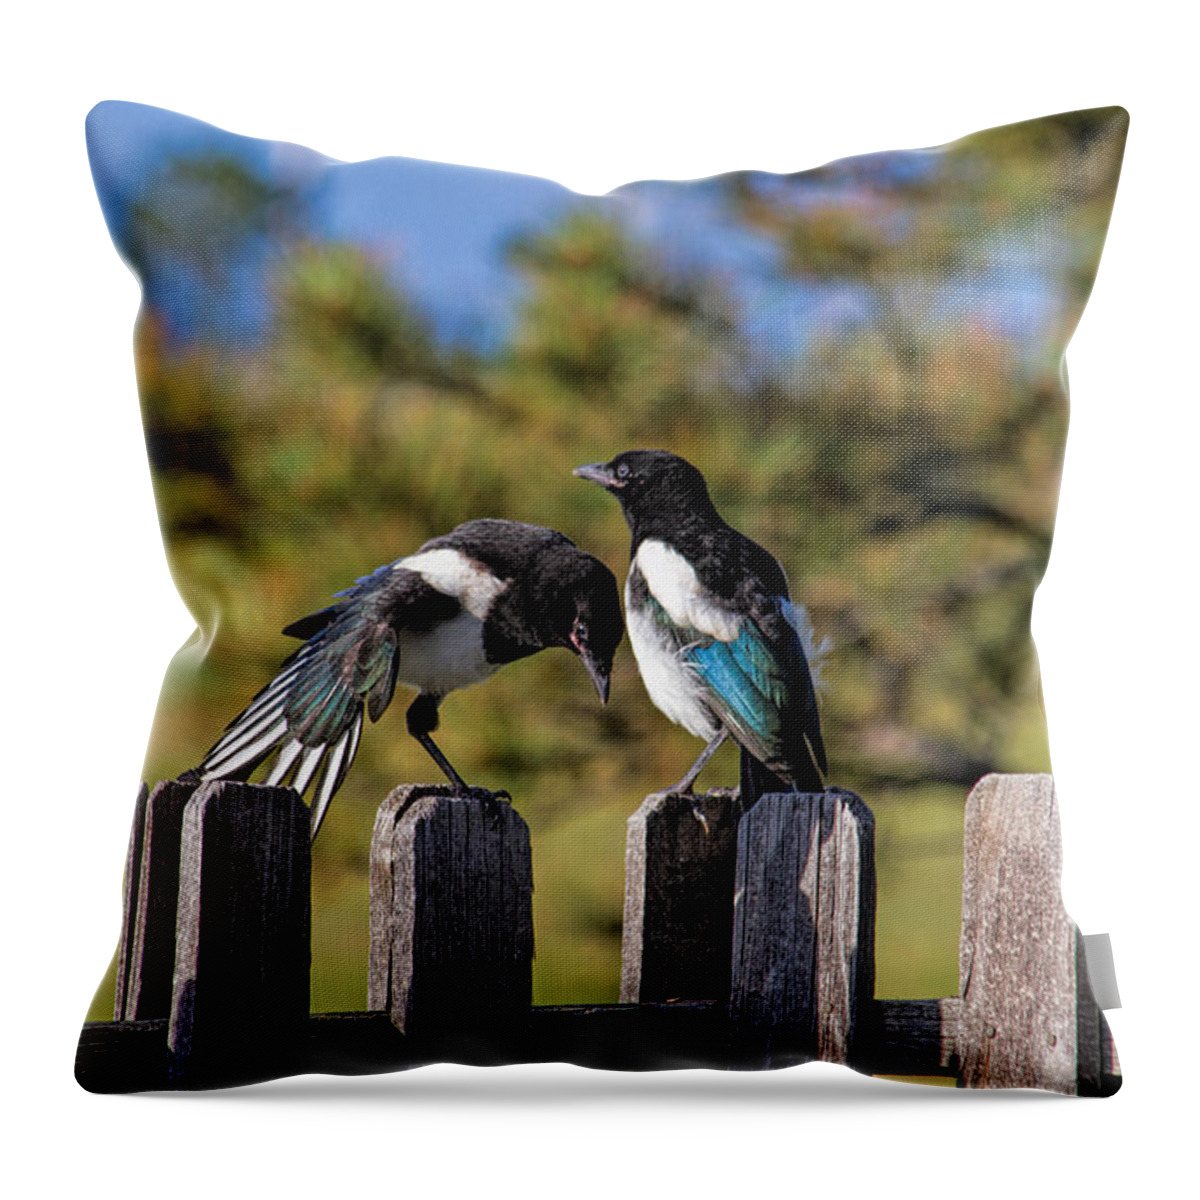 Bird Throw Pillow featuring the photograph Winging It by Alana Thrower